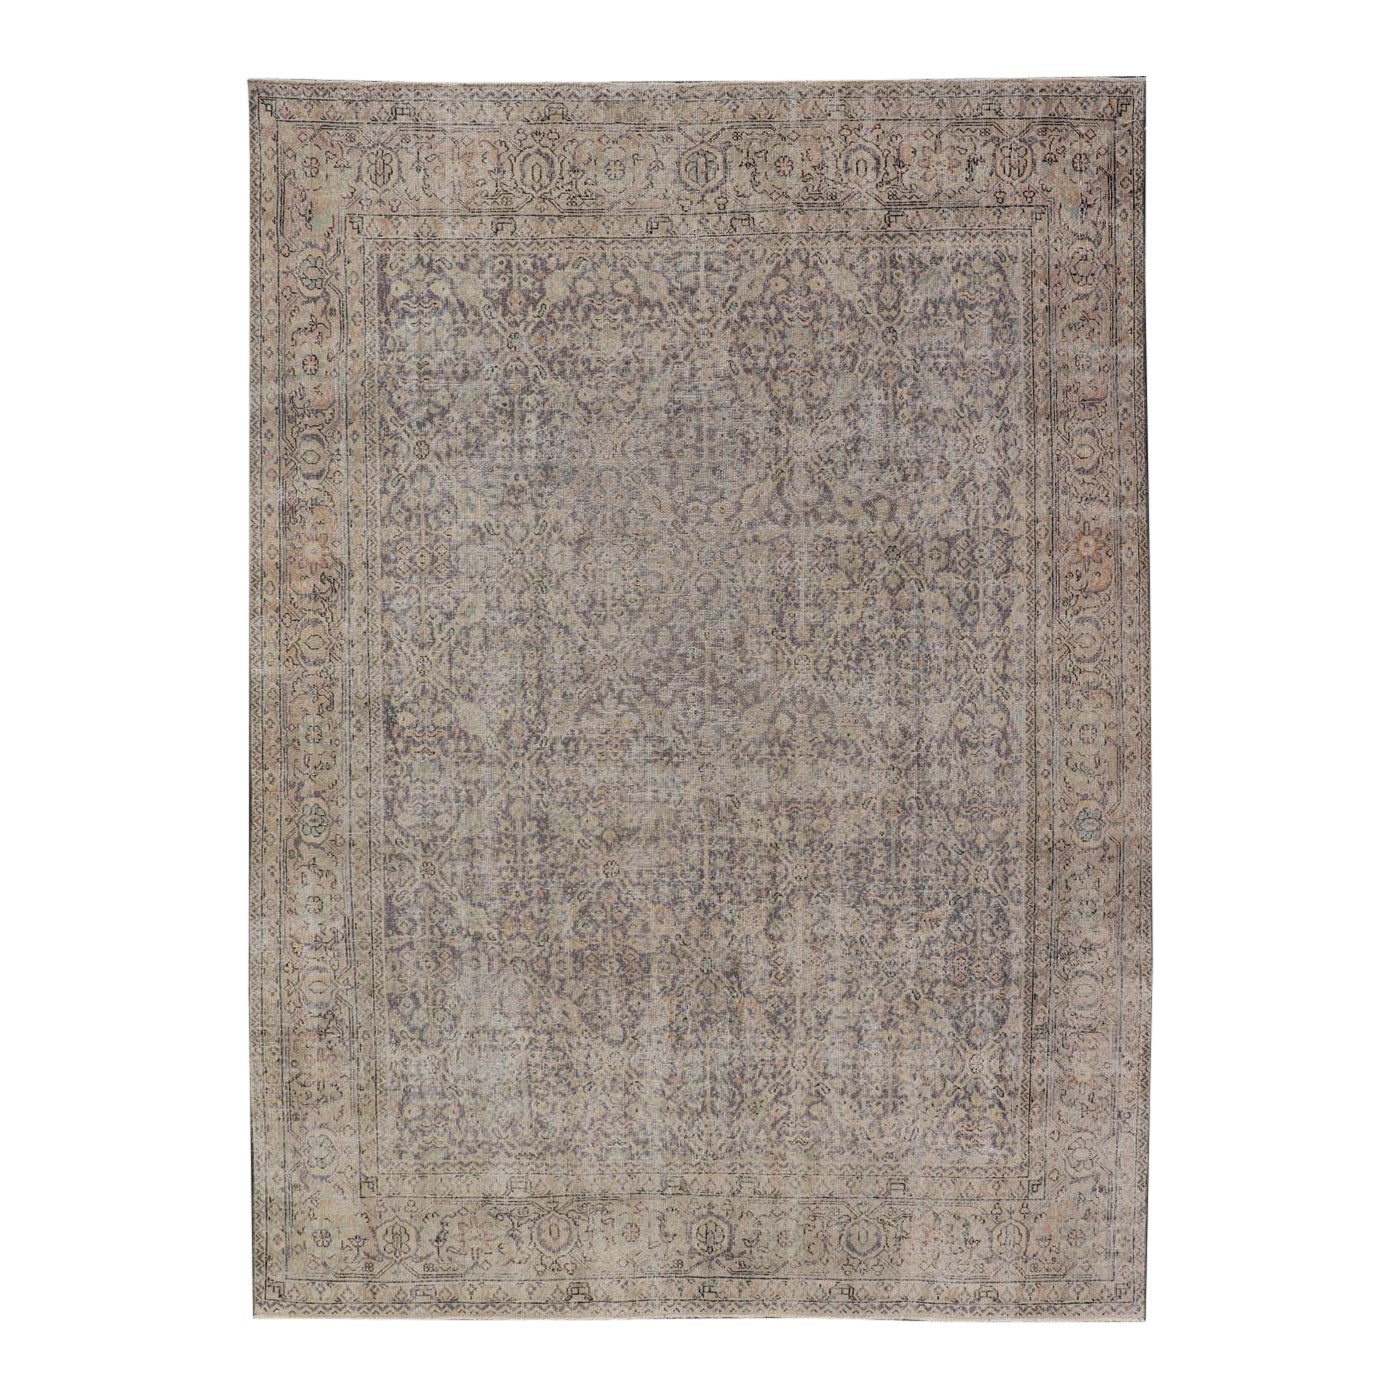 All-Over Vintage Turkish Distressed Rug in Cream, Lavender, Taupe, and Green